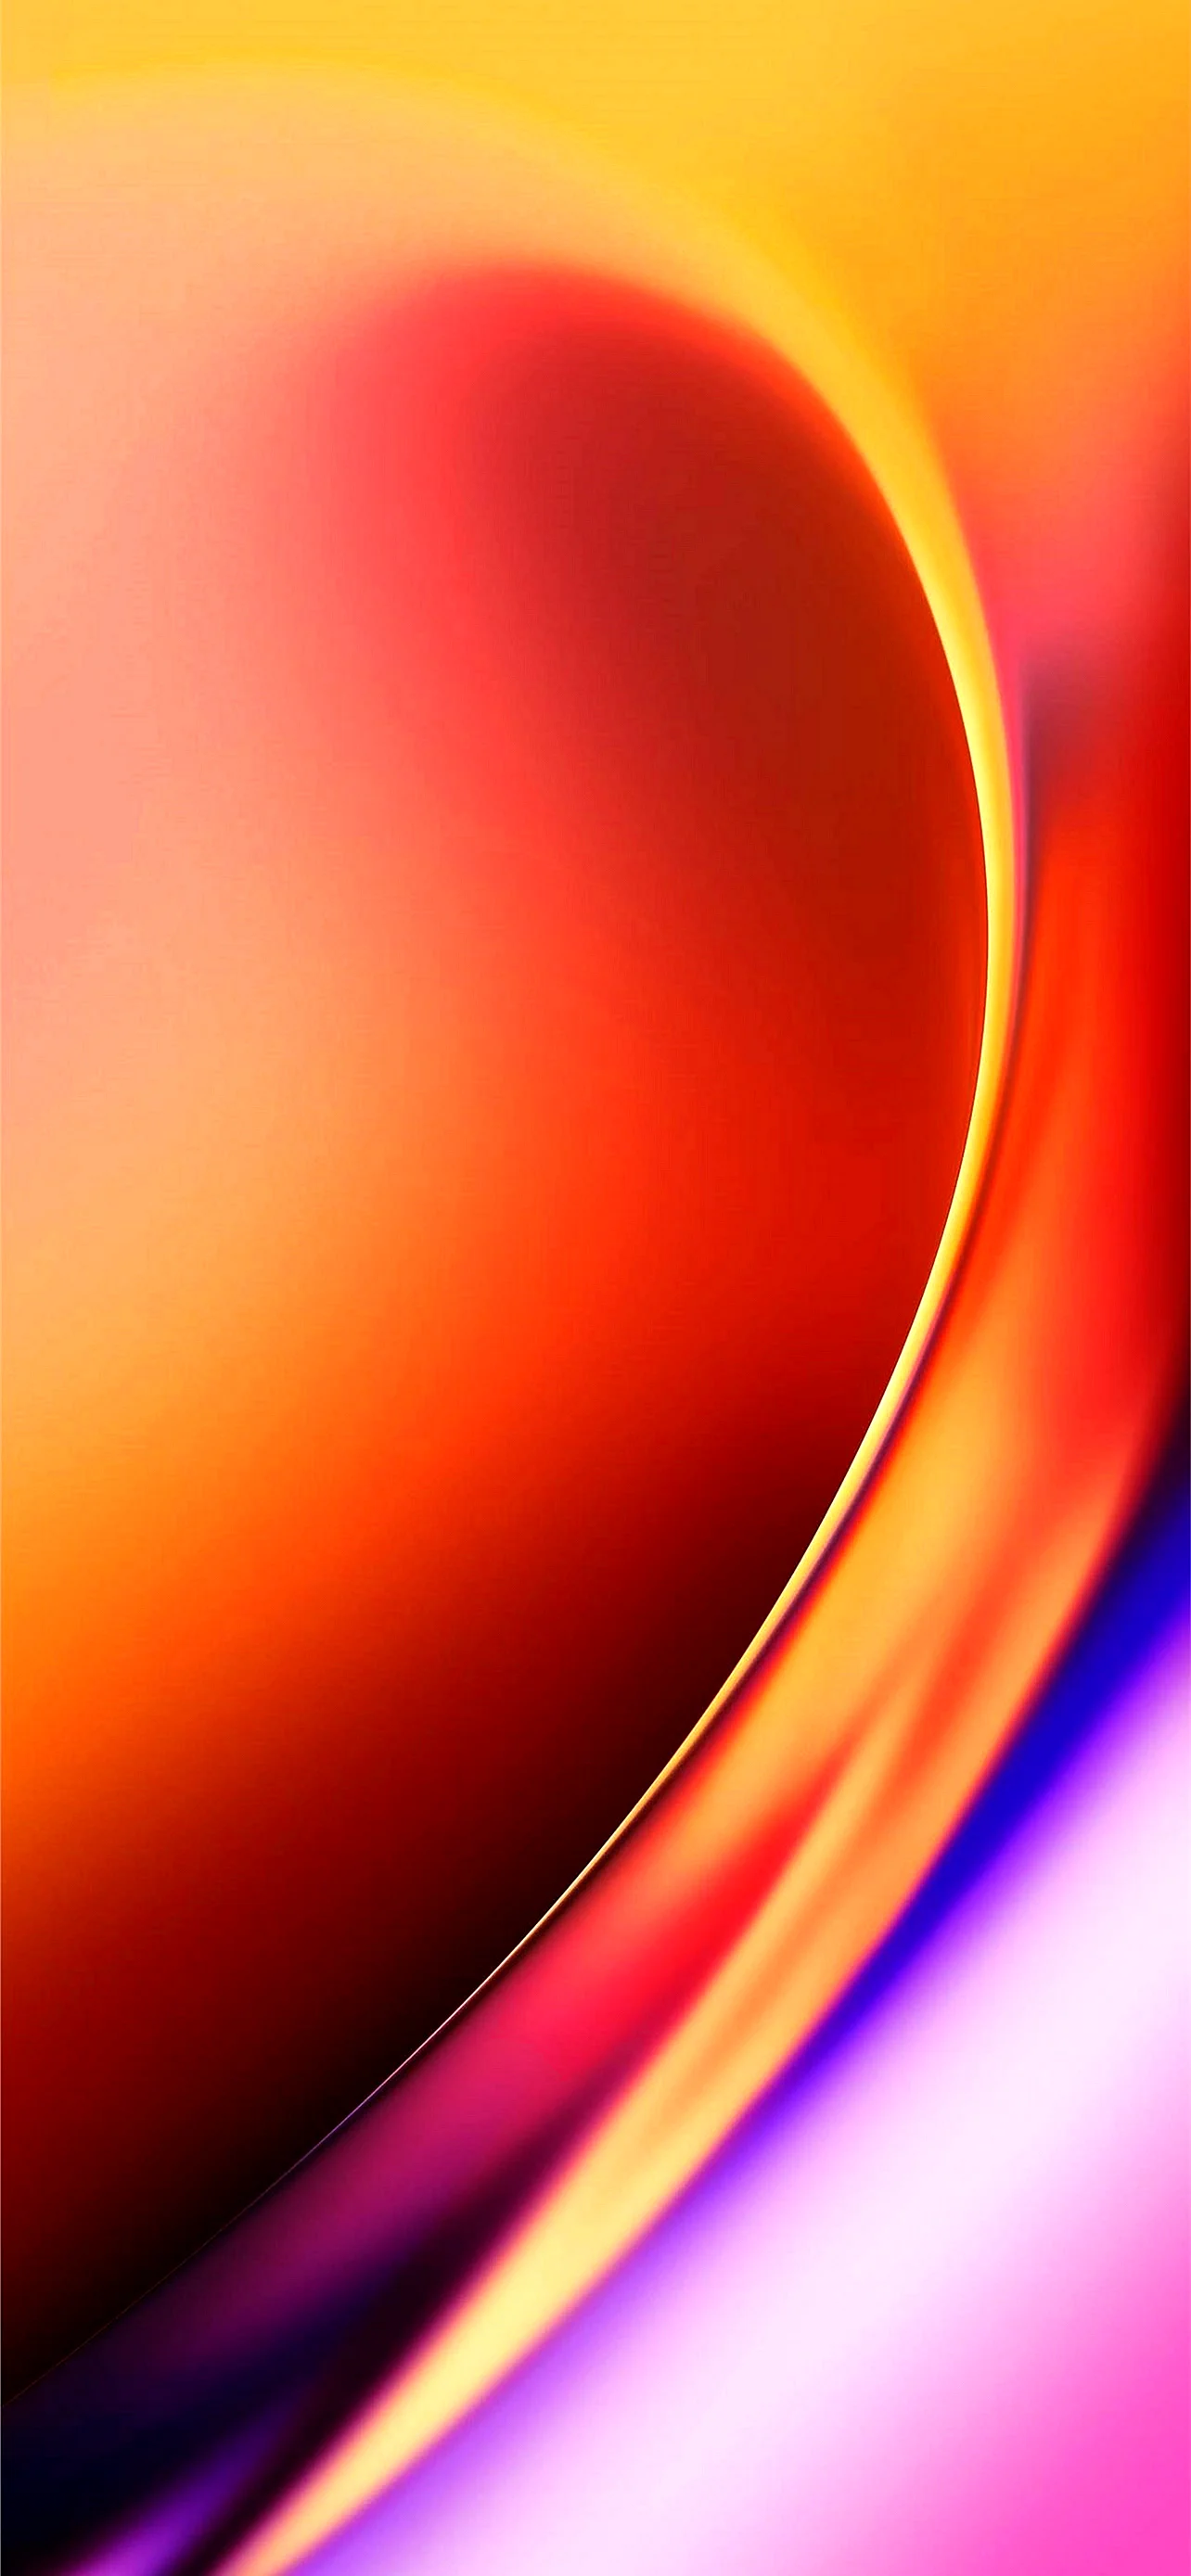 Oneplus Wallpaper for iPhone 13 Pro Max